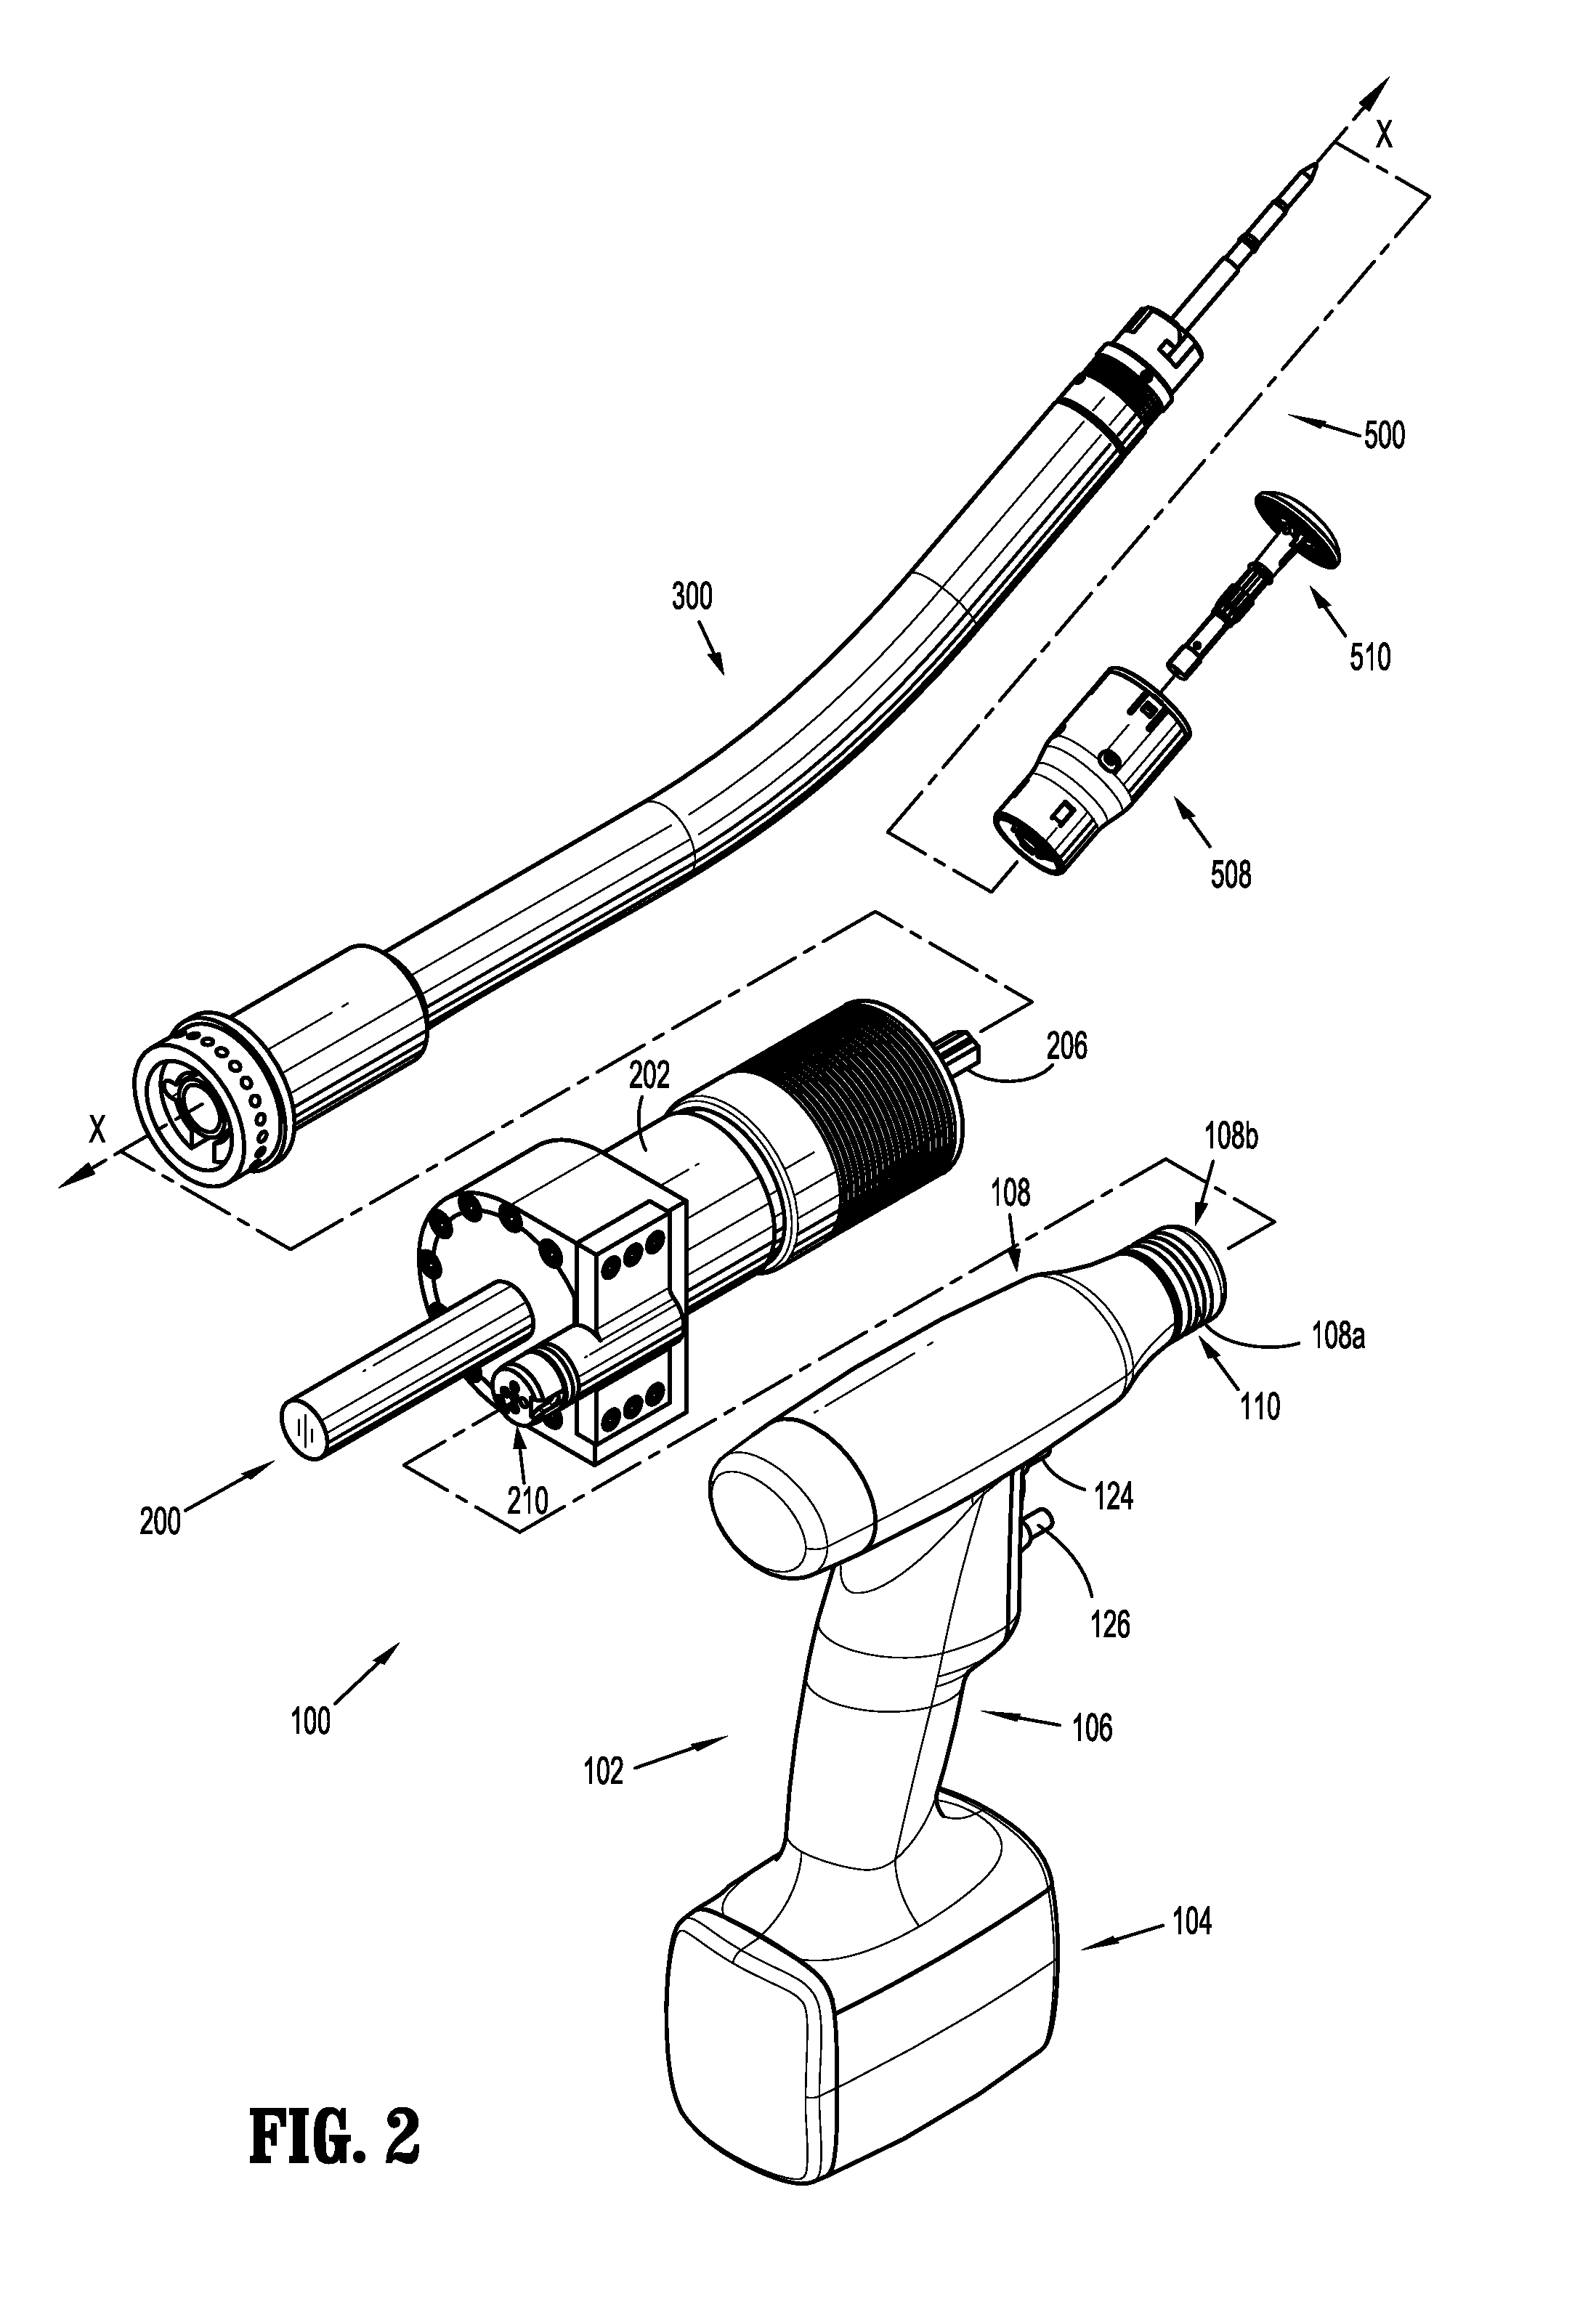 Surgical device, surgical adapters for use between surgical handle assembly and surgical loading units, and methods of use